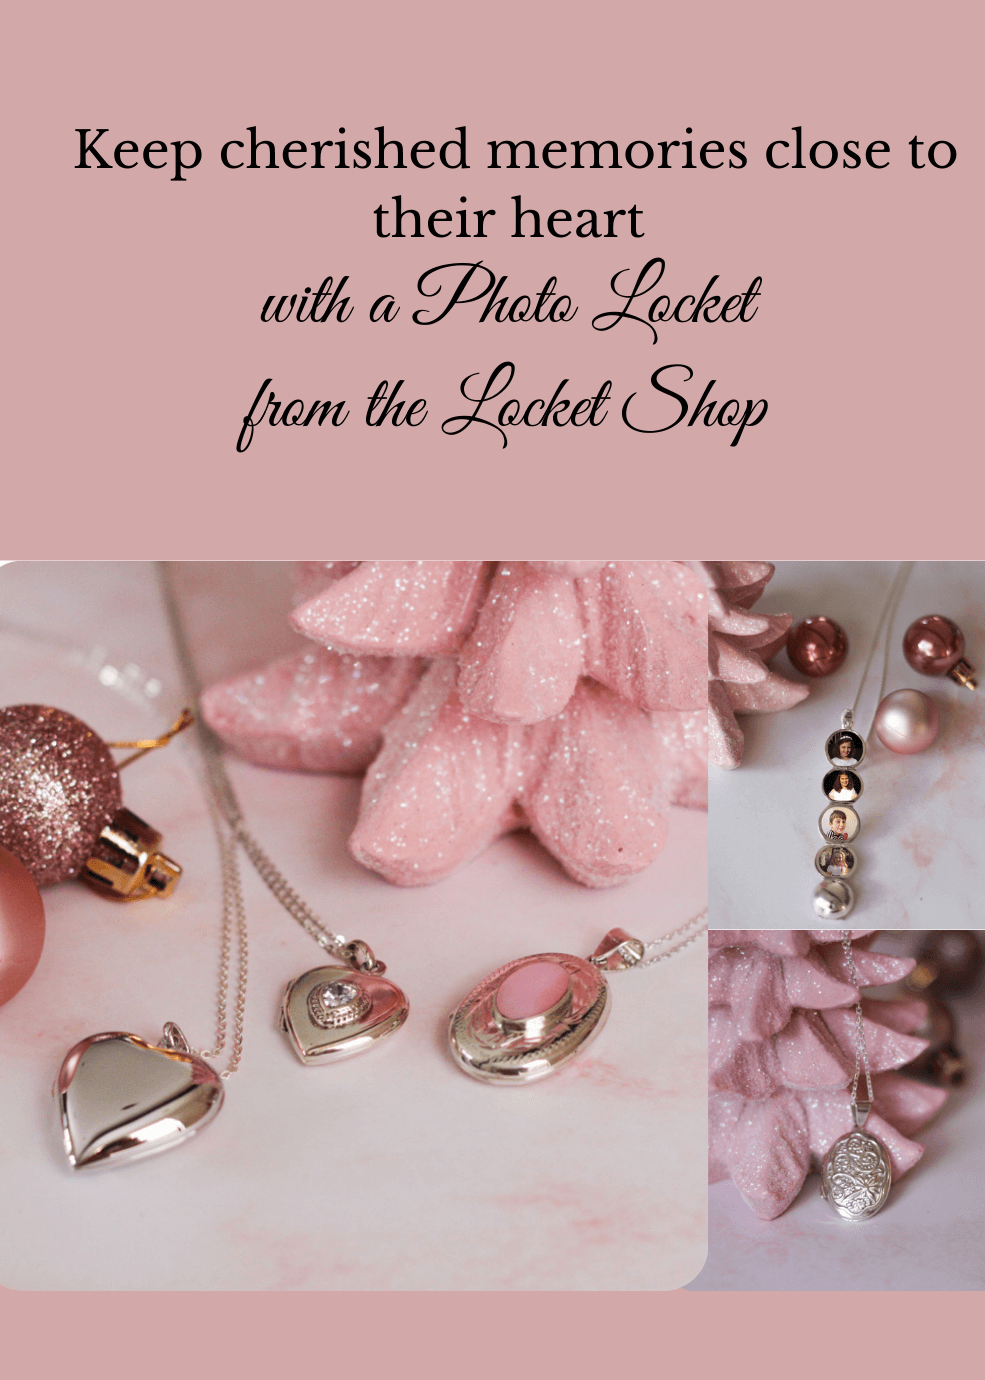 The Locket Shop Voucher variety of lockets with pink baubles